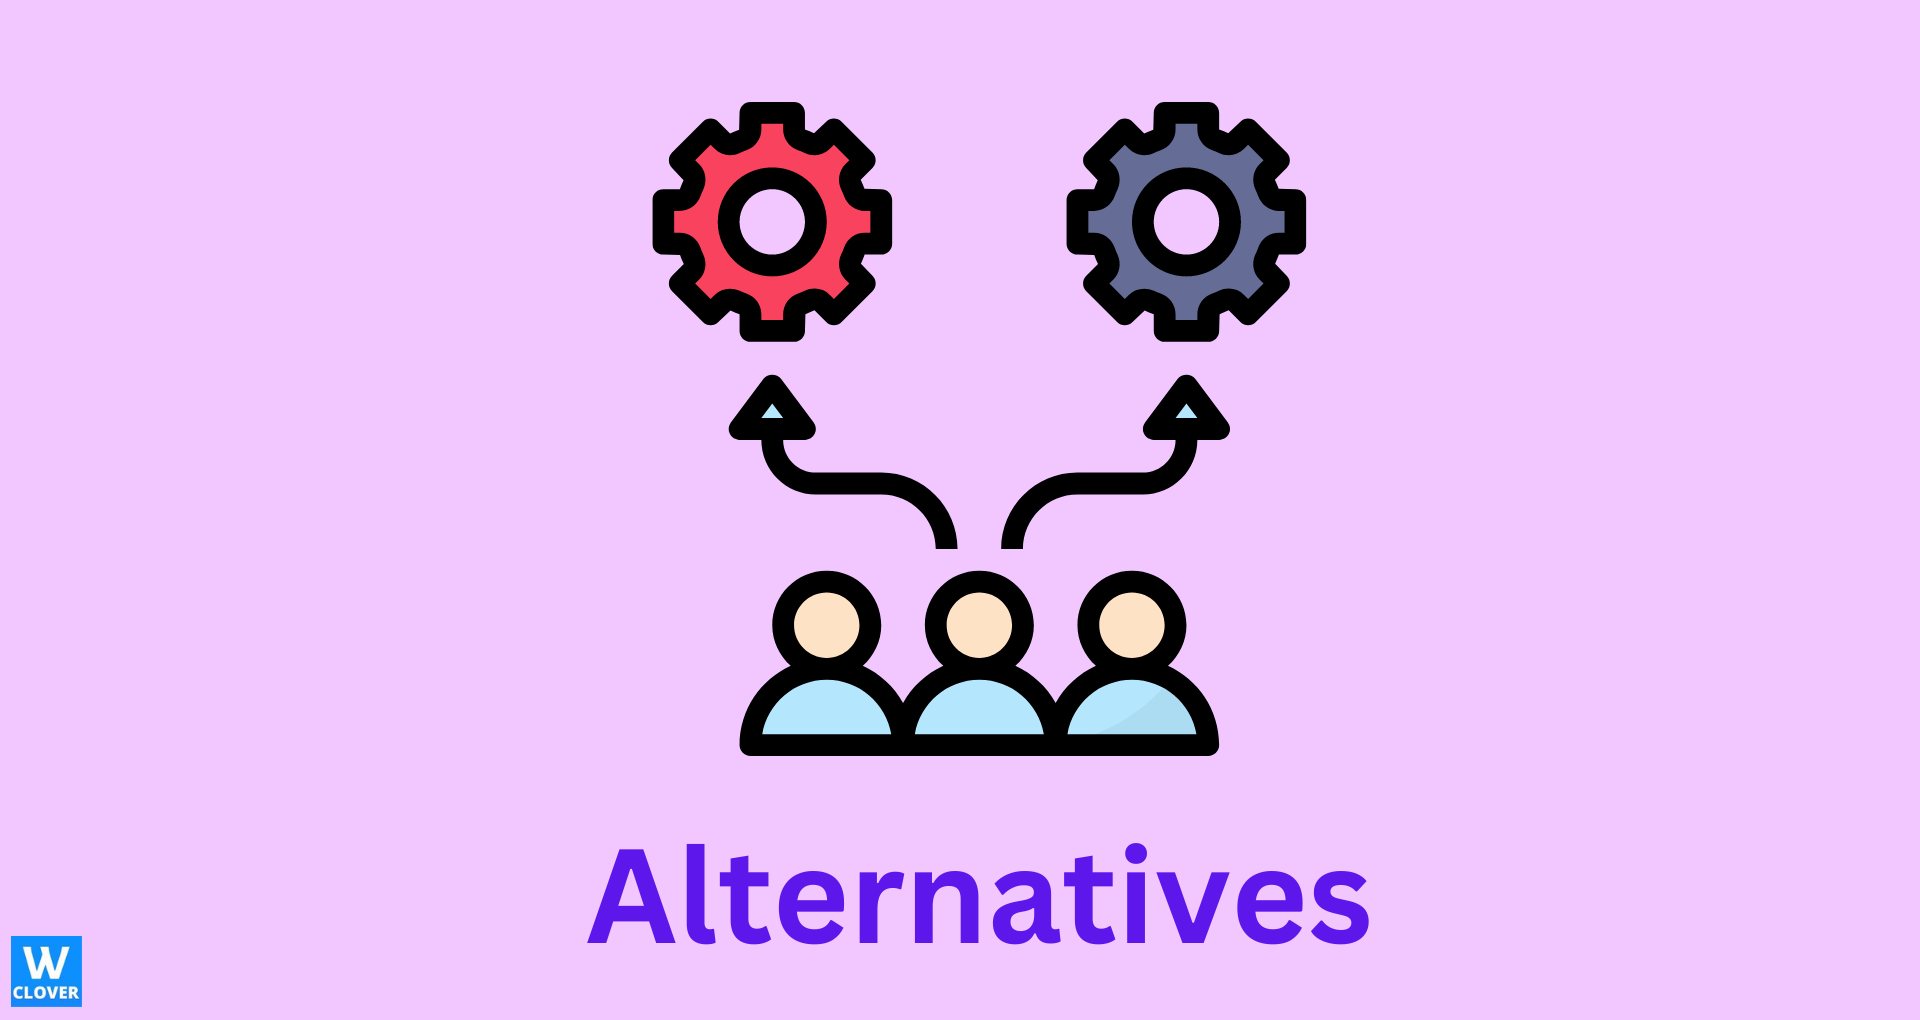 Thrive alternatives-two cogs three graphic figures and two arrows on a purple background